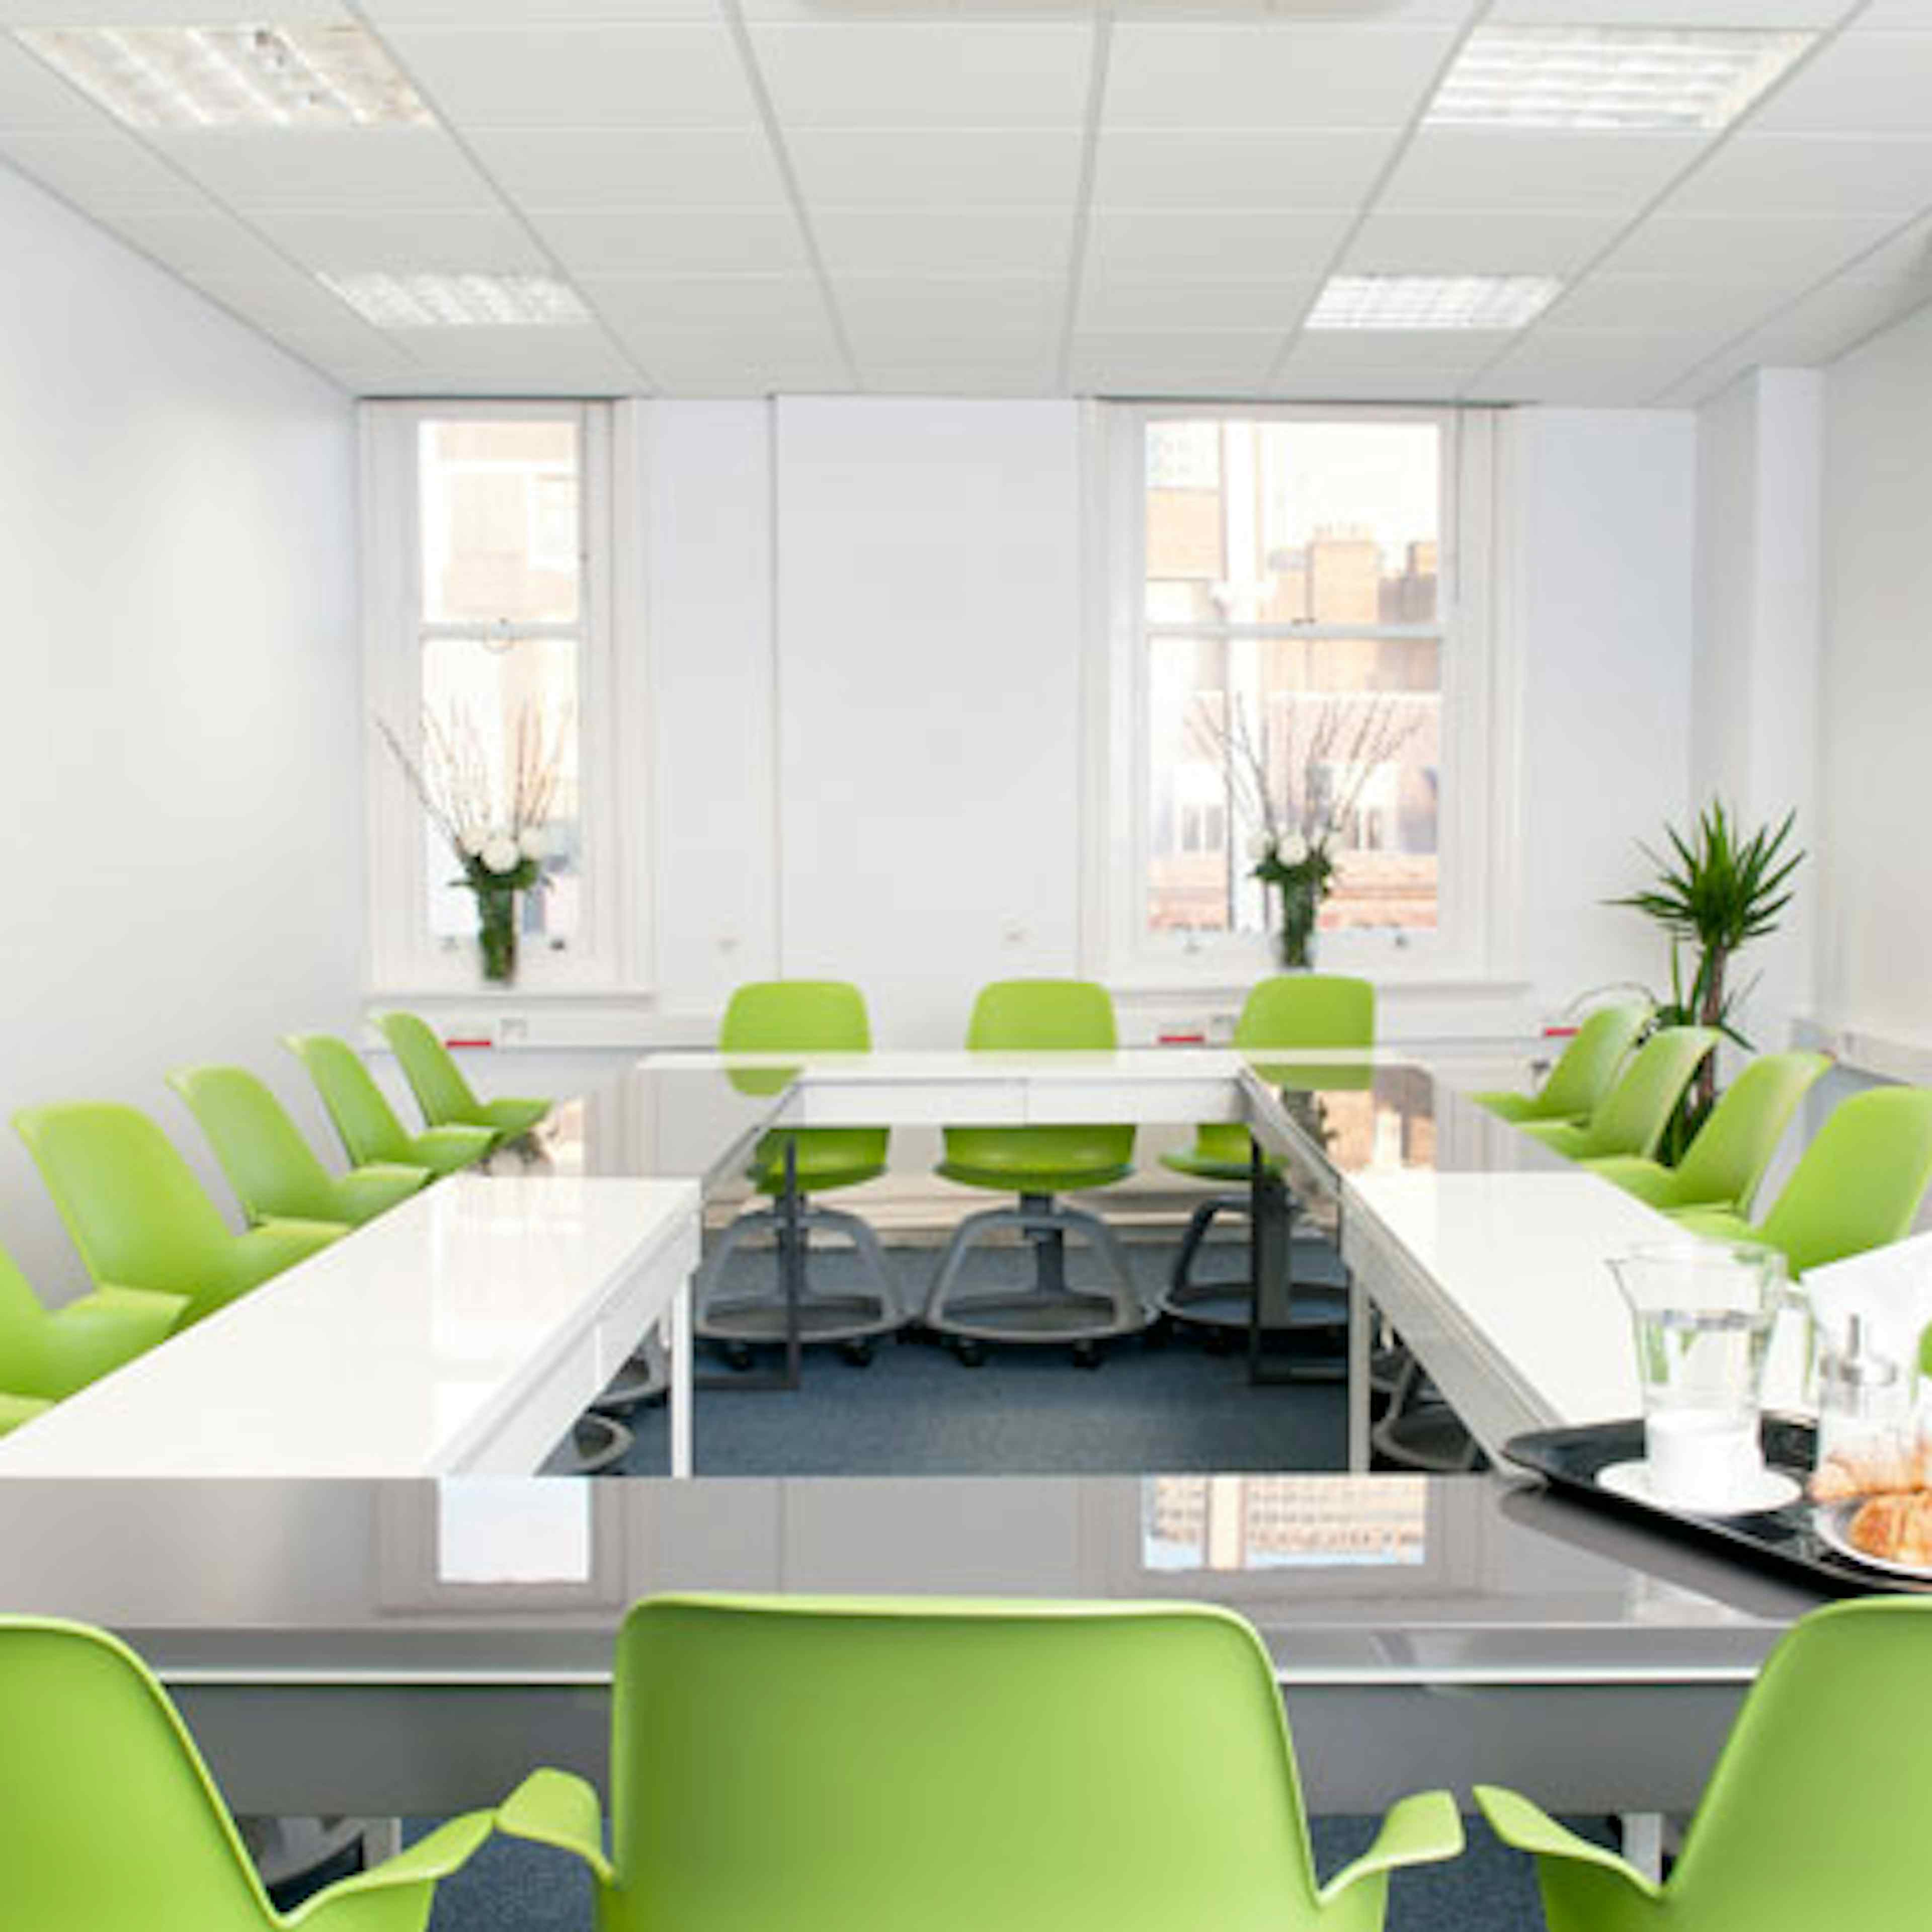 MSE Meeting Rooms - Tottenham Court Road - image 3